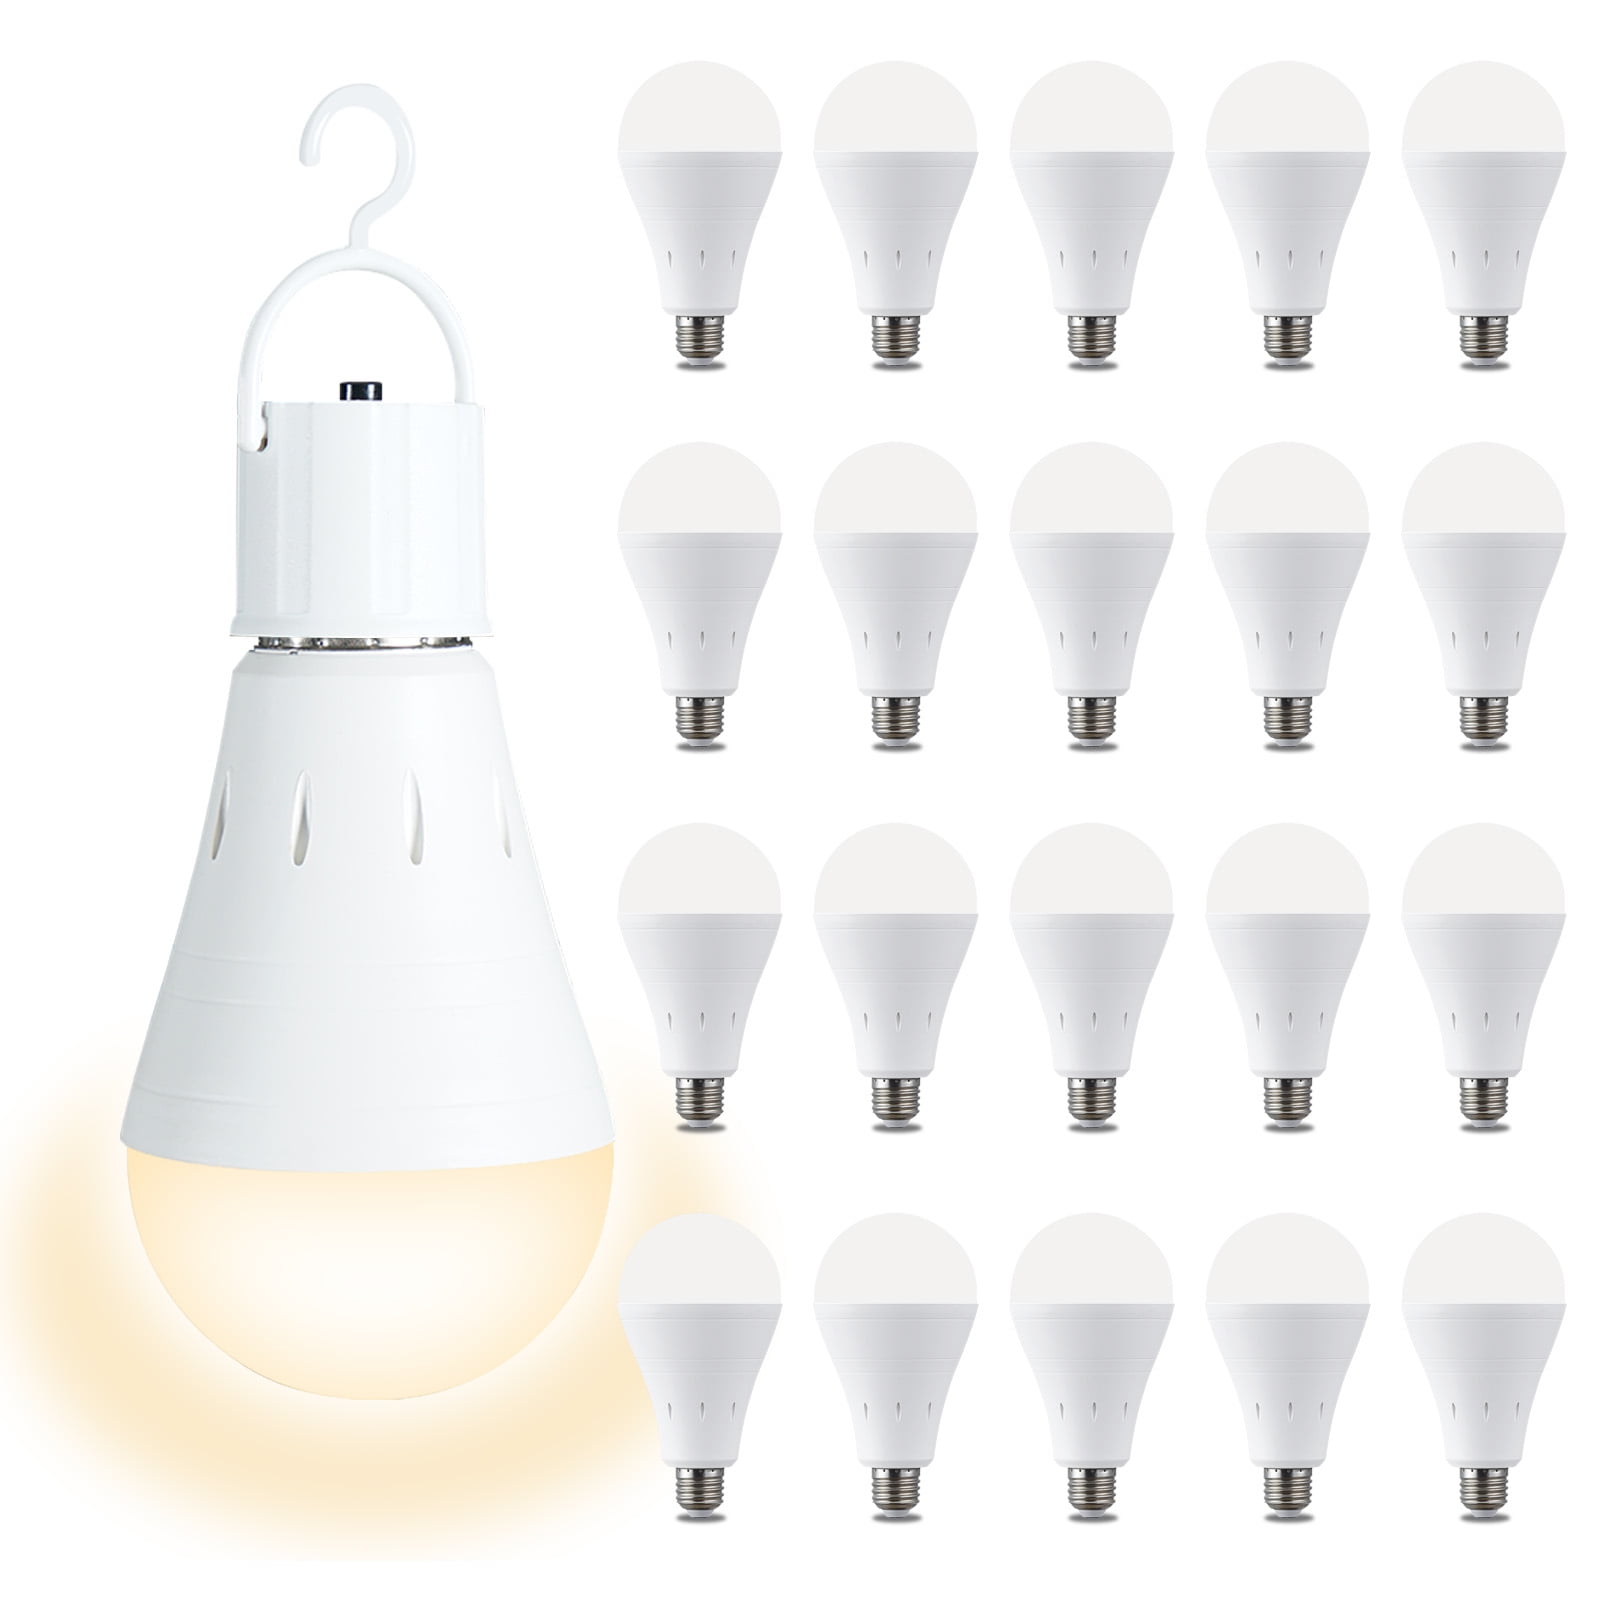 LIKERTLA LED Rechargeable Light Bulbs,7W LED Magic Bulbs with Remote Control Warm White Emergency Light E26 Battery Operated Lamp Without